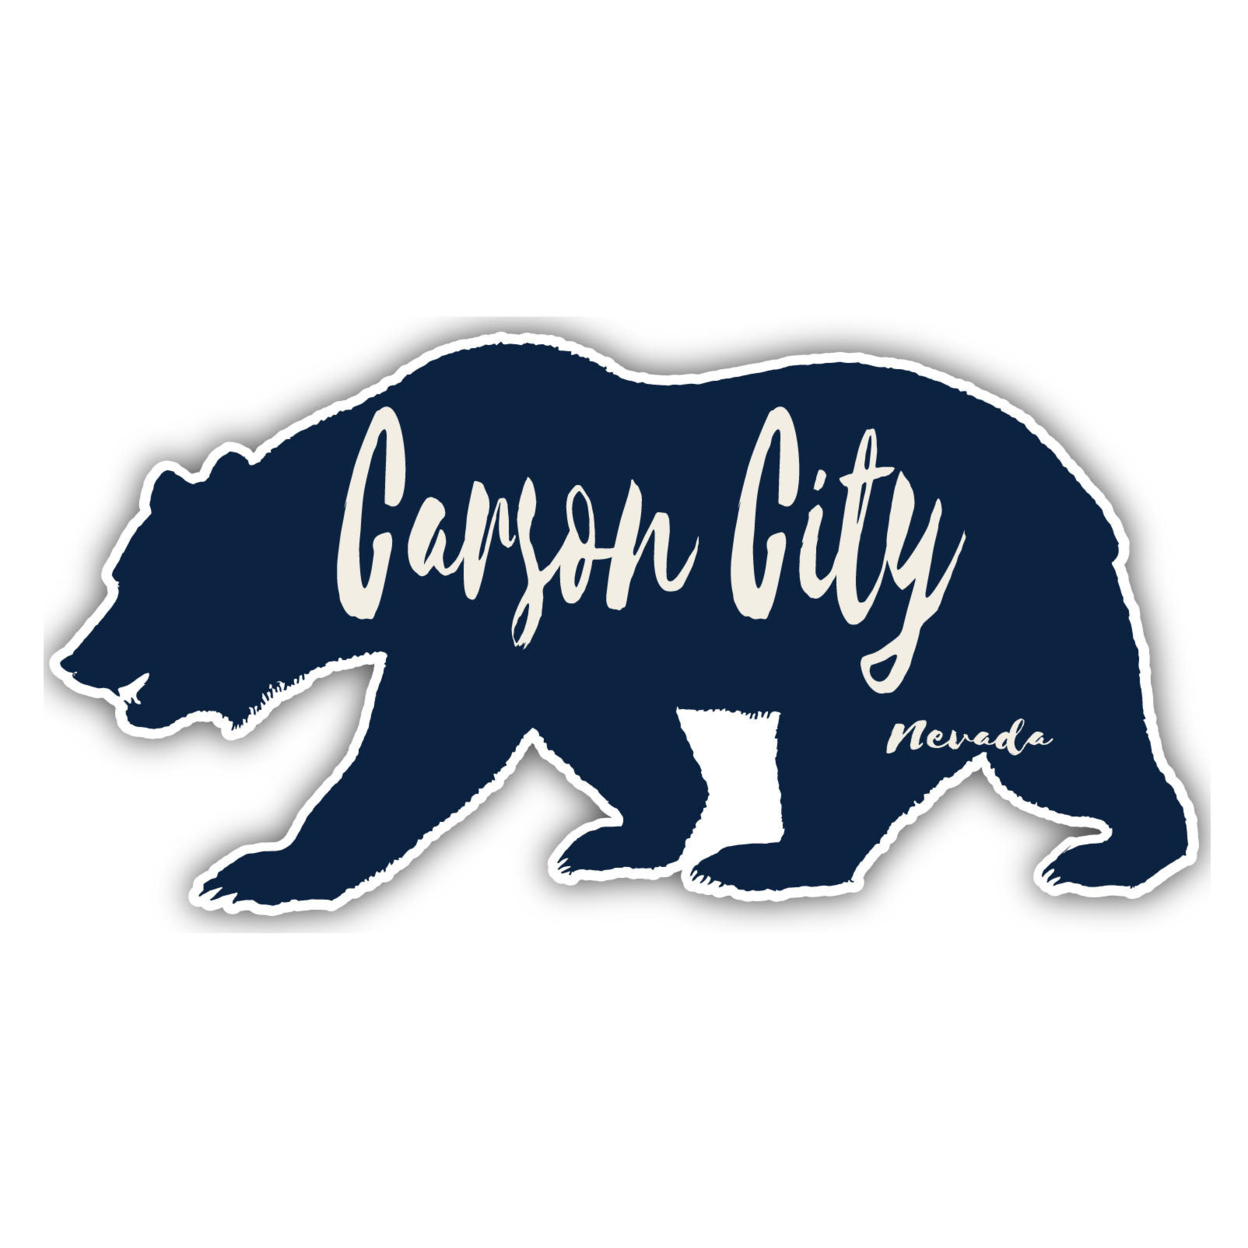 Carson City Nevada Souvenir Decorative Stickers (Choose Theme And Size) - 4-Pack, 10-Inch, Tent